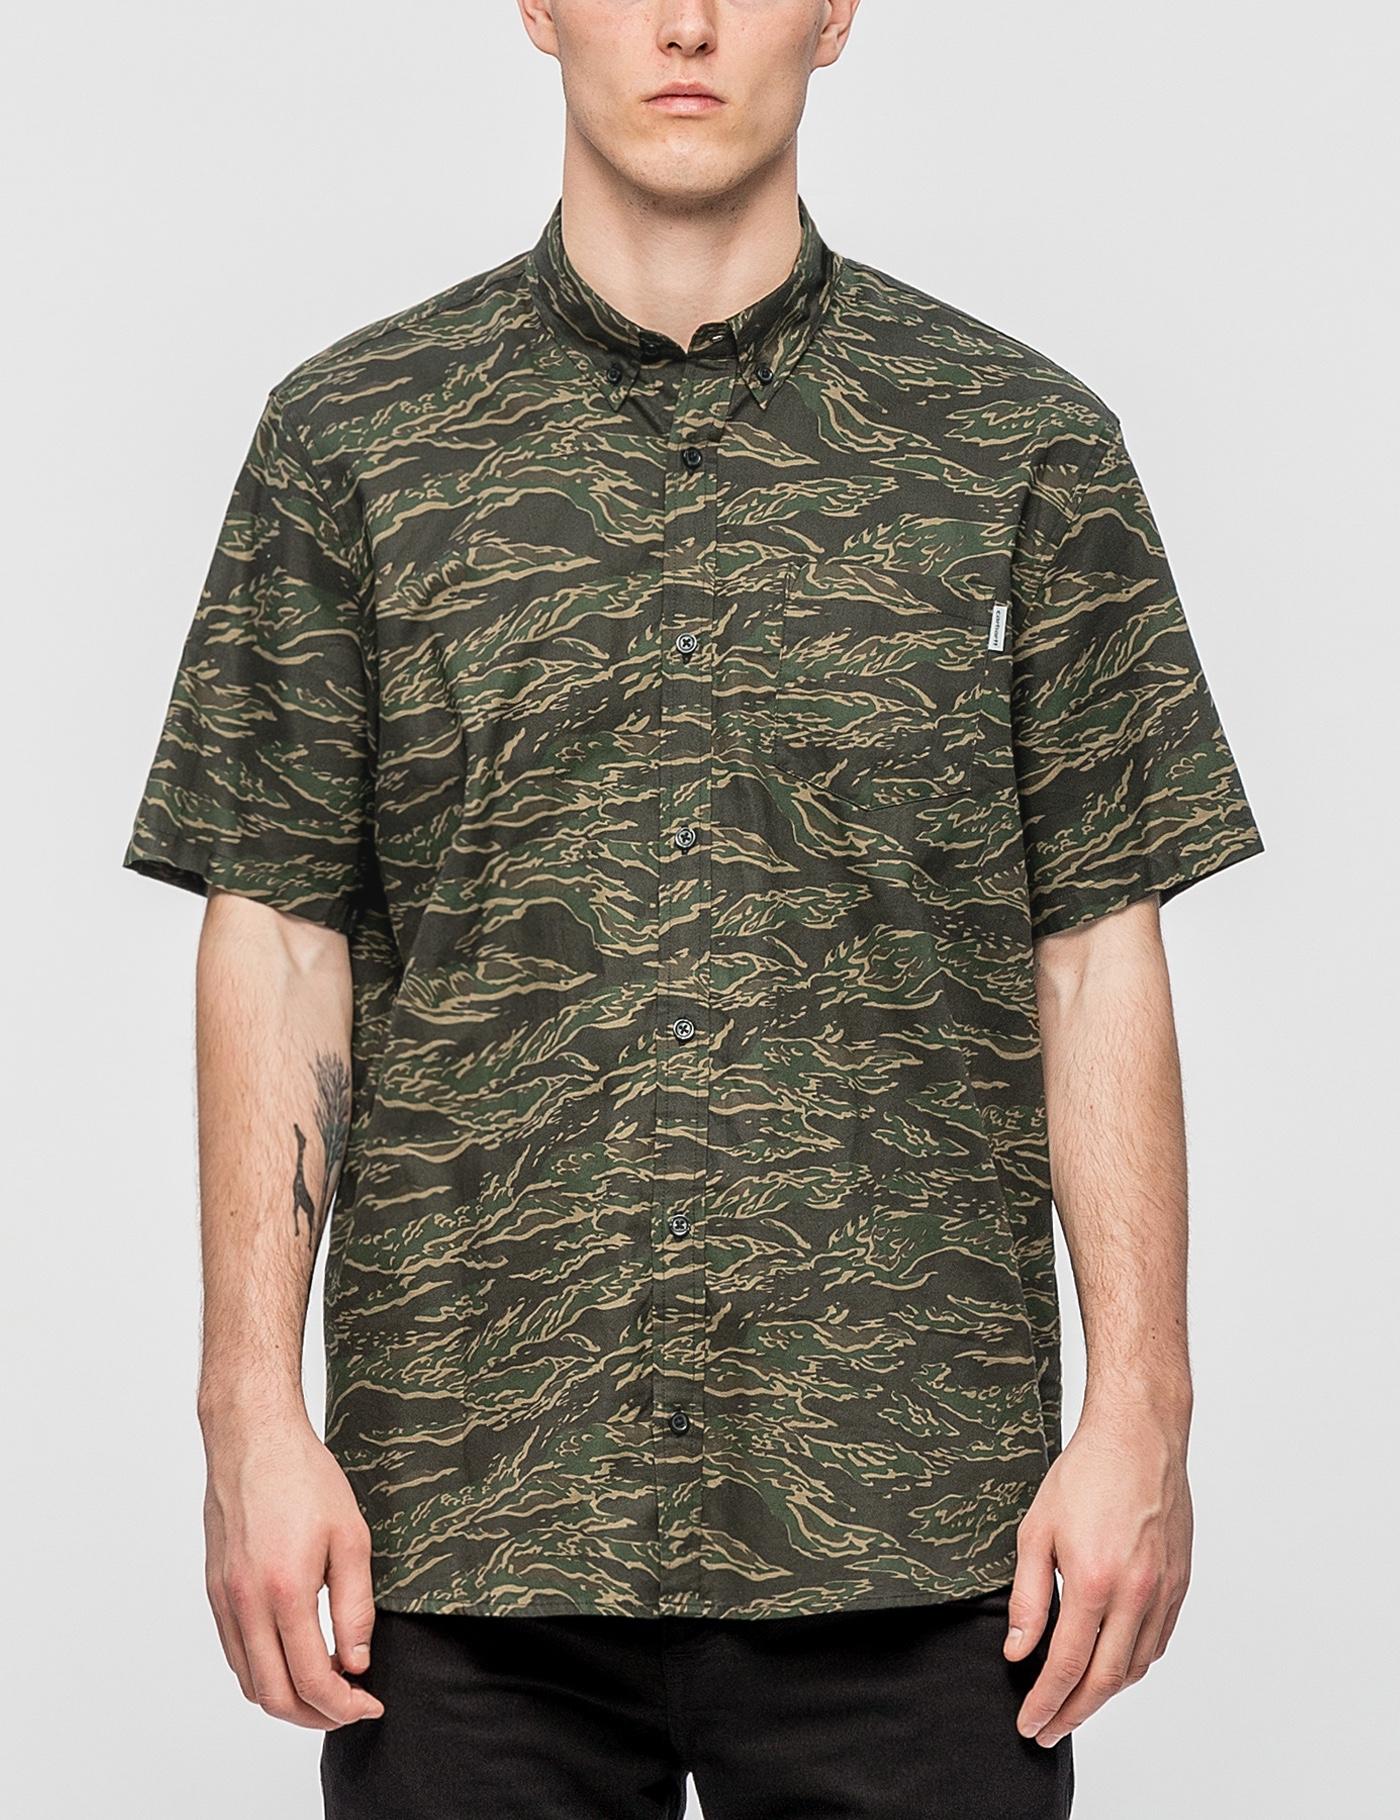 Carhartt WIP Cotton Tiger Camo S/s Shirt in Green for Men - Lyst